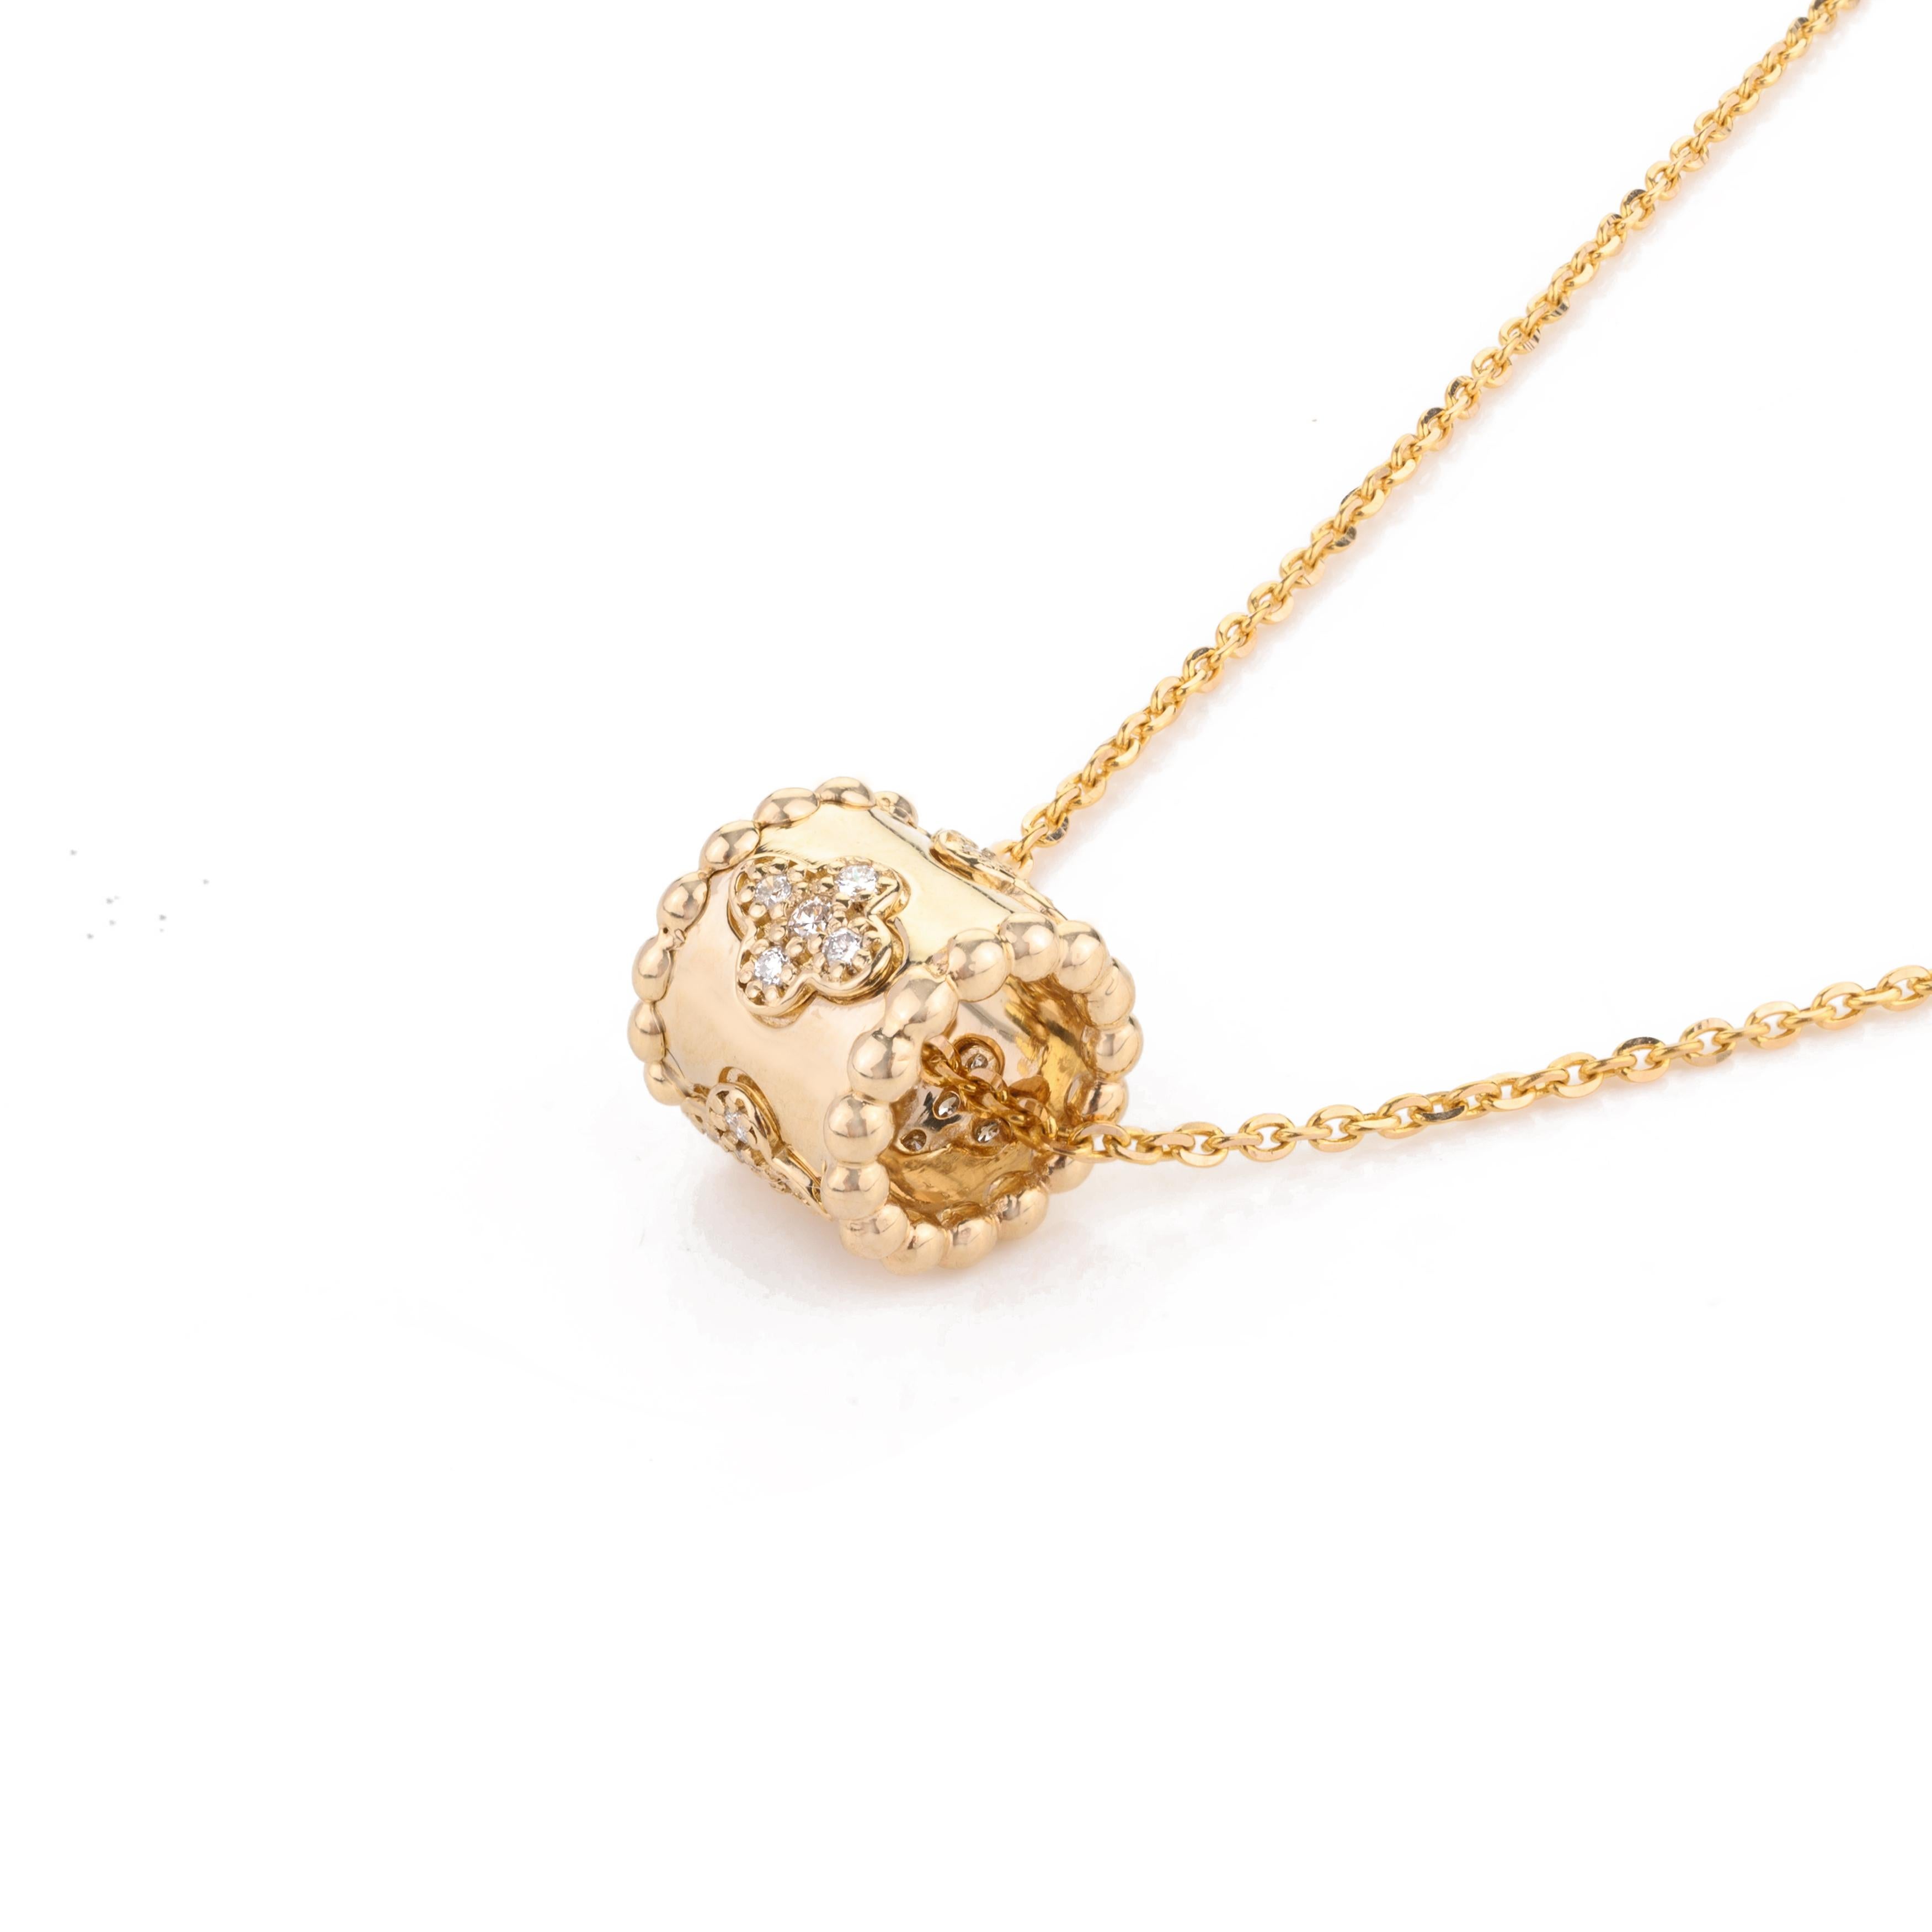 Diamond Clover Roller Pendant Chain Necklace for Her in 14k Solid Yellow Gold In New Condition For Sale In Houston, TX